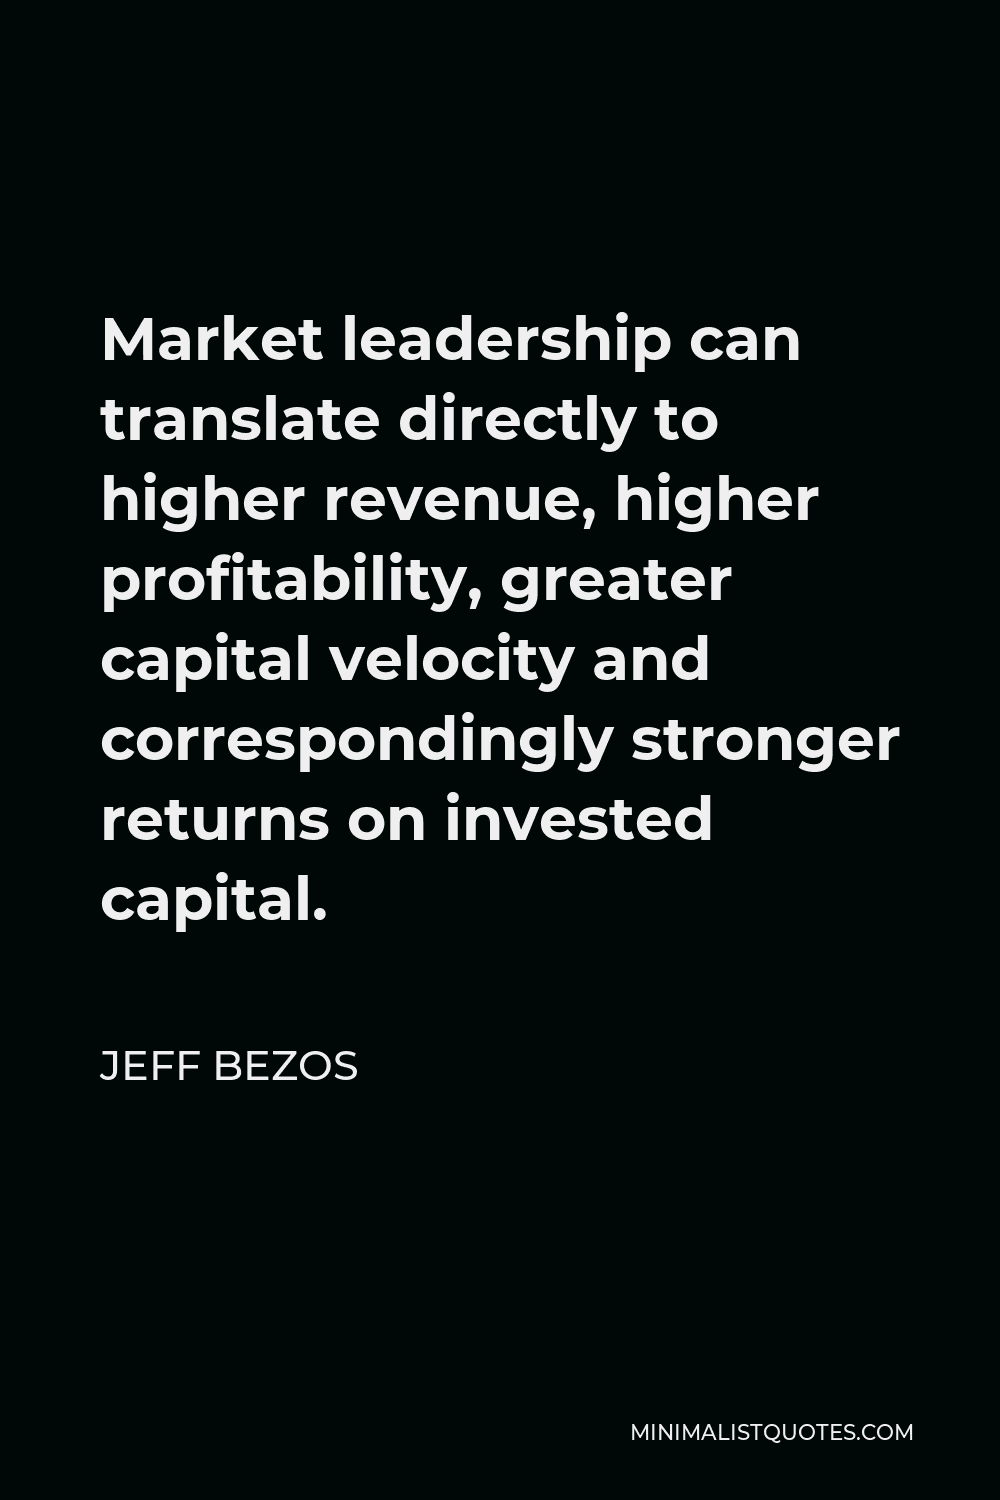 Jeff Bezos Quote - Market leadership can translate directly to higher revenue, higher profitability, greater capital velocity and correspondingly stronger returns on invested capital.